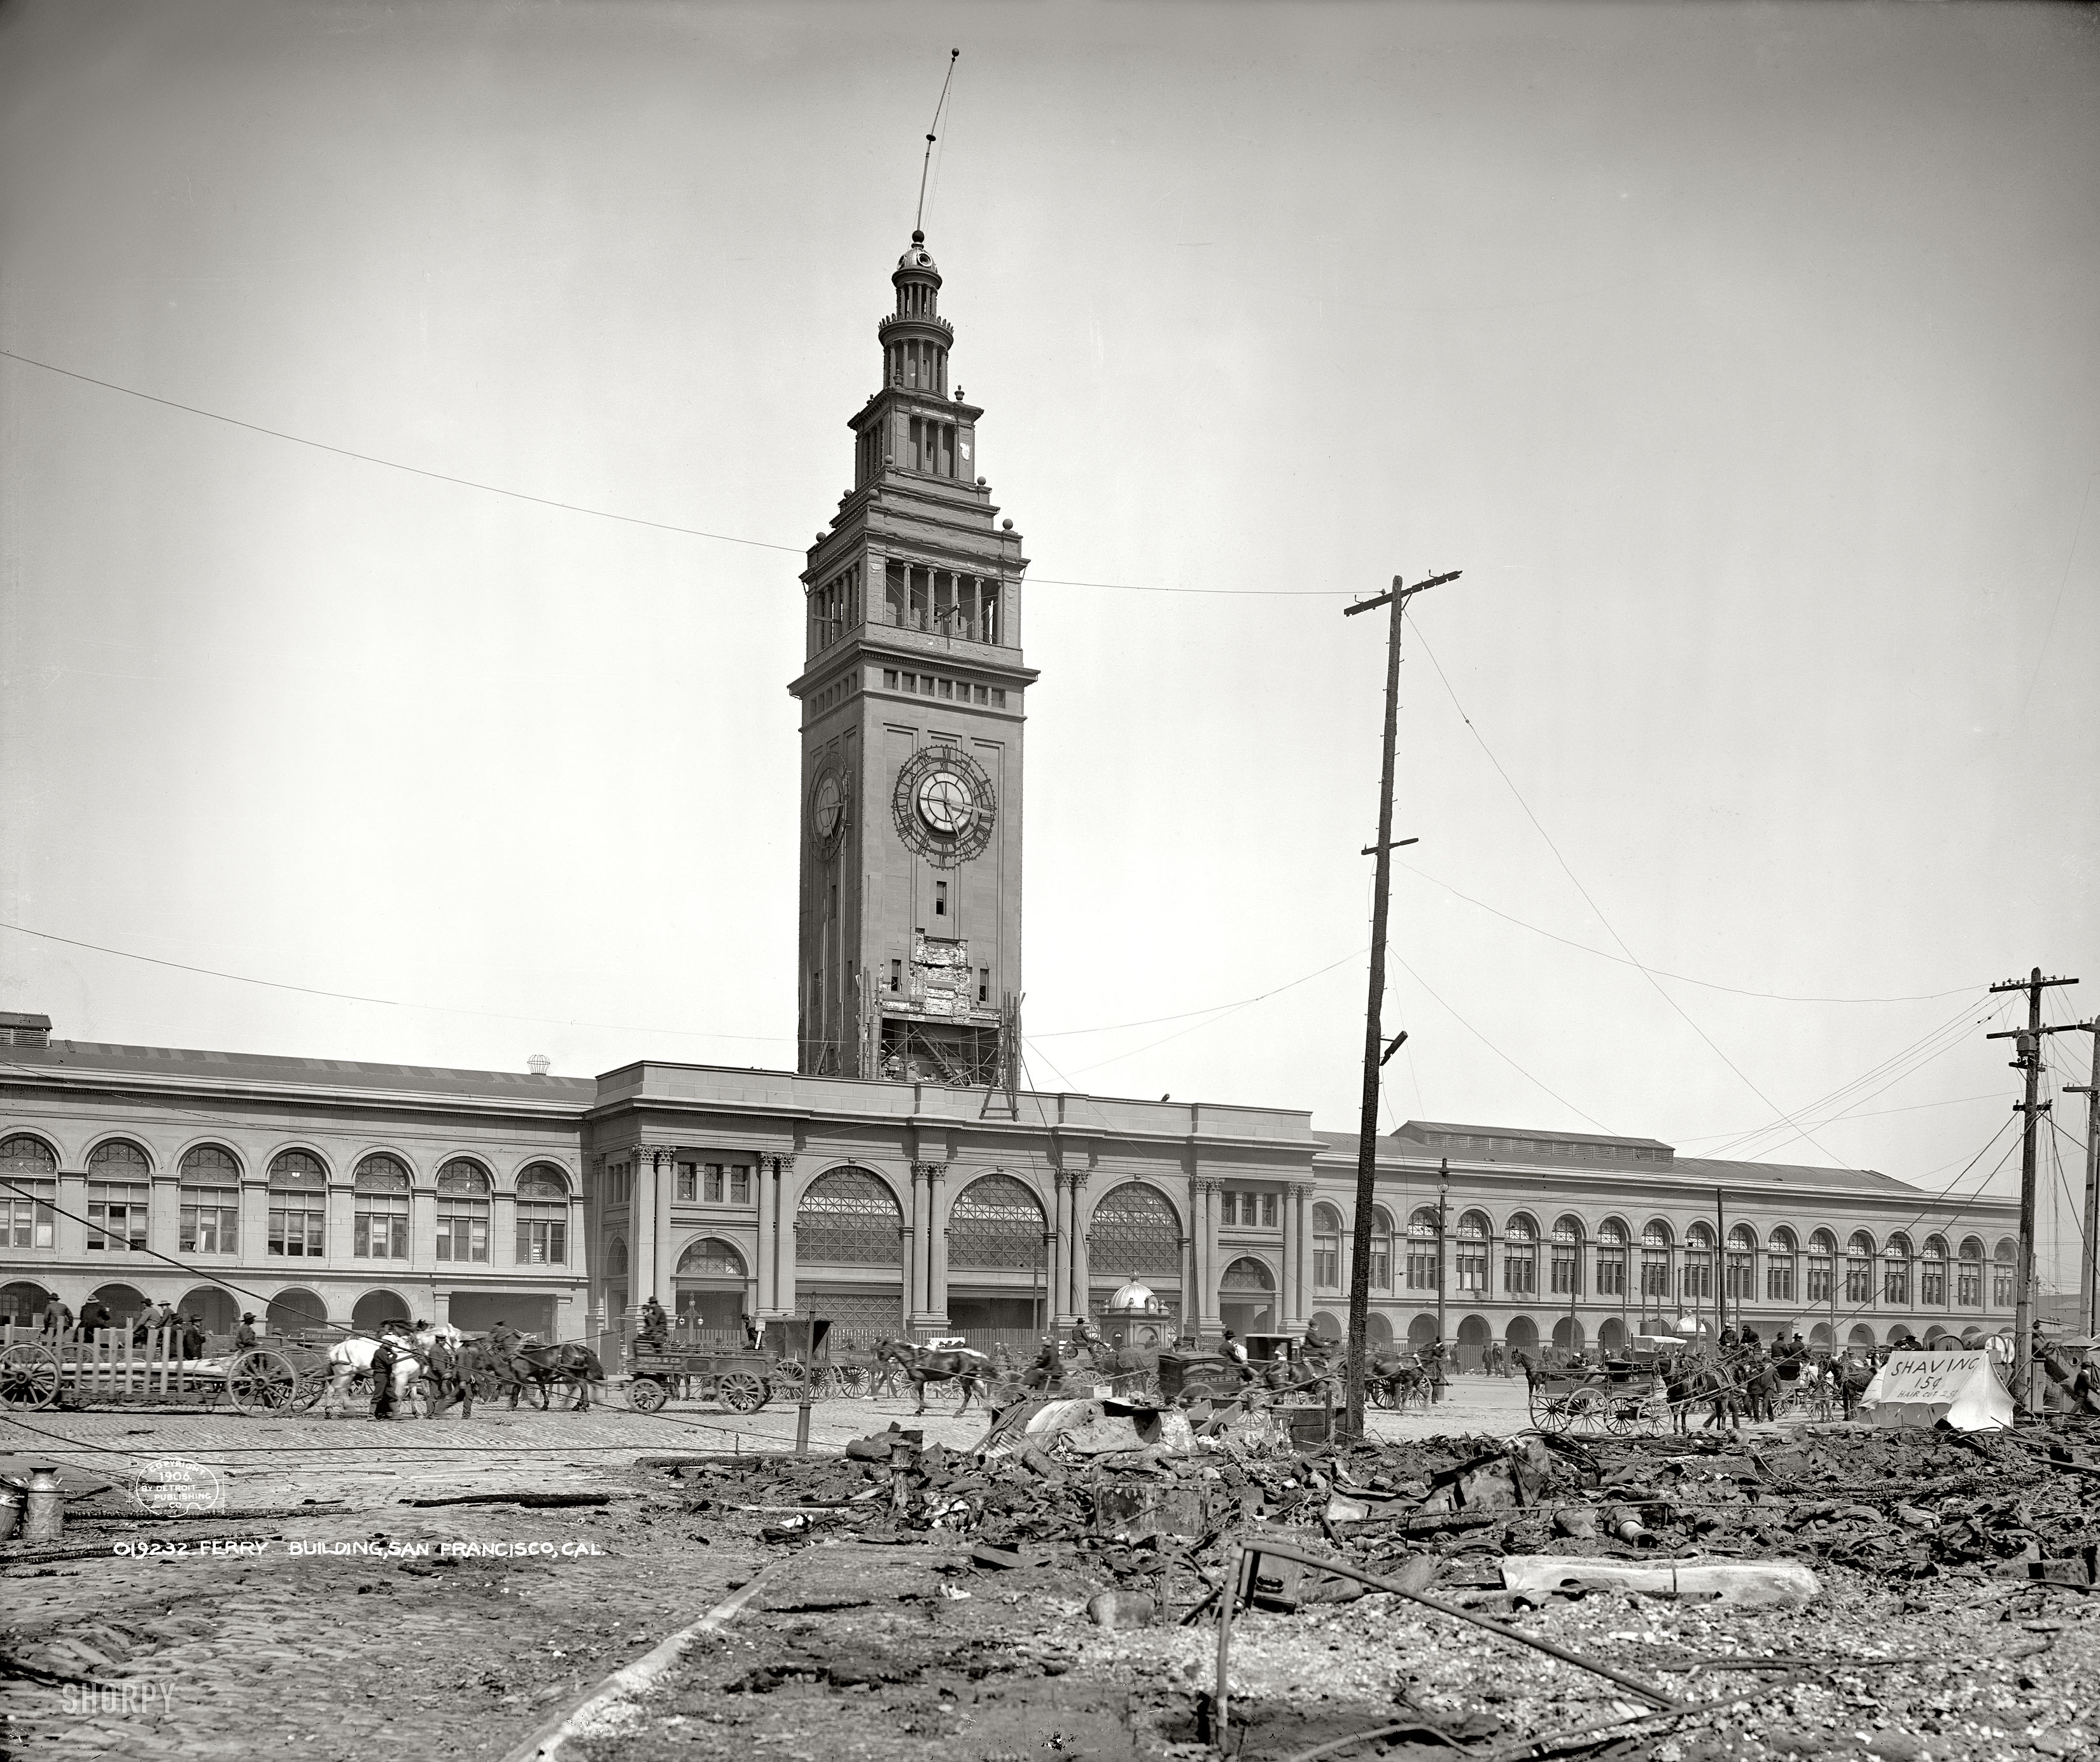 "Ferry Building, San Francisco, 1906." Aftermath of the earthquake and fire. 8x10 inch dry plate glass negative, Detroit Publishing Company. View full size.